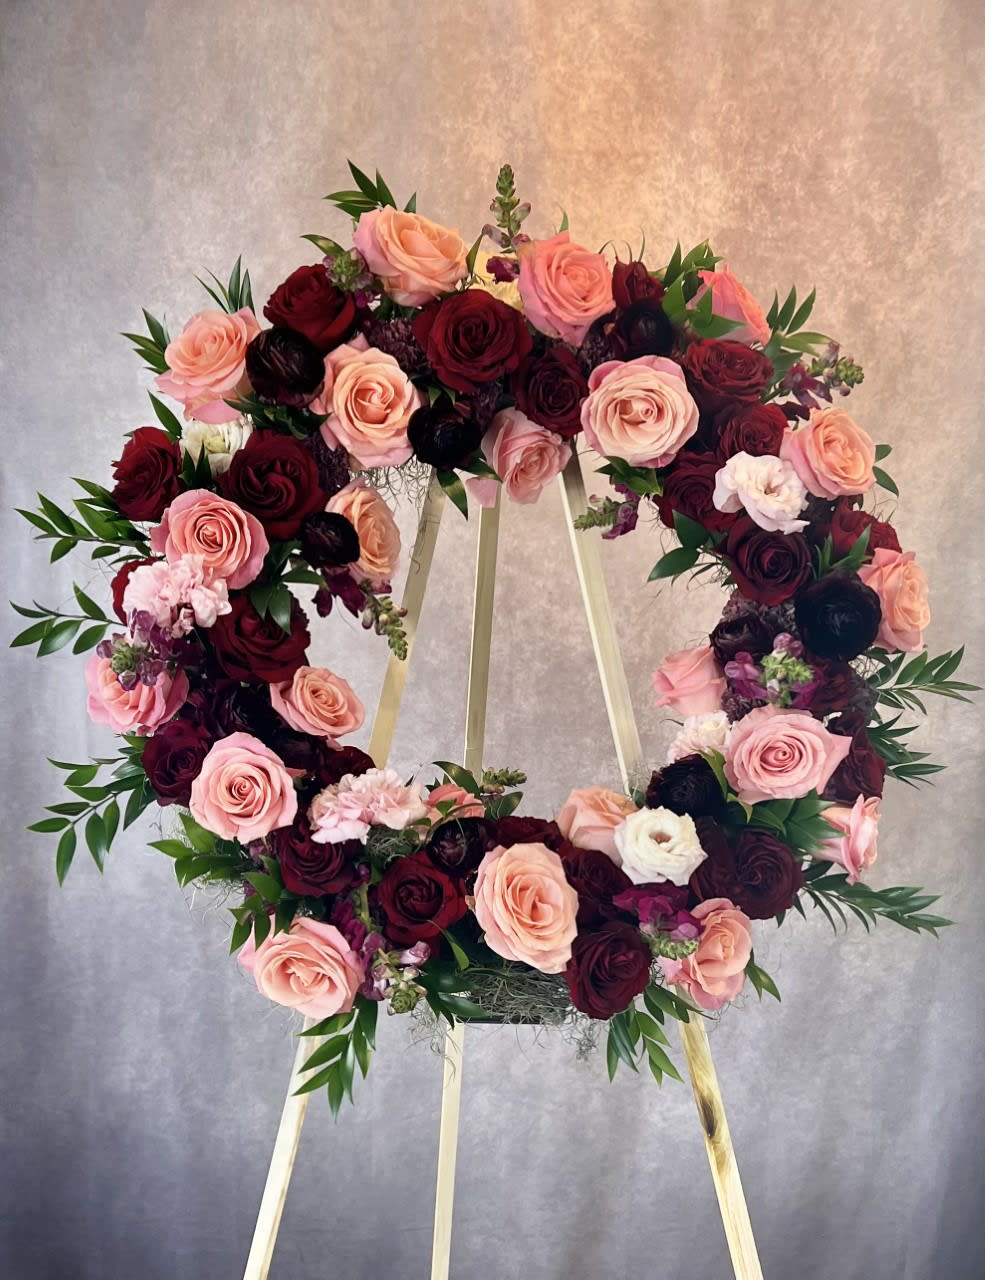 This traditional memorial wreath features the best of the season&rsquo;s offerings in